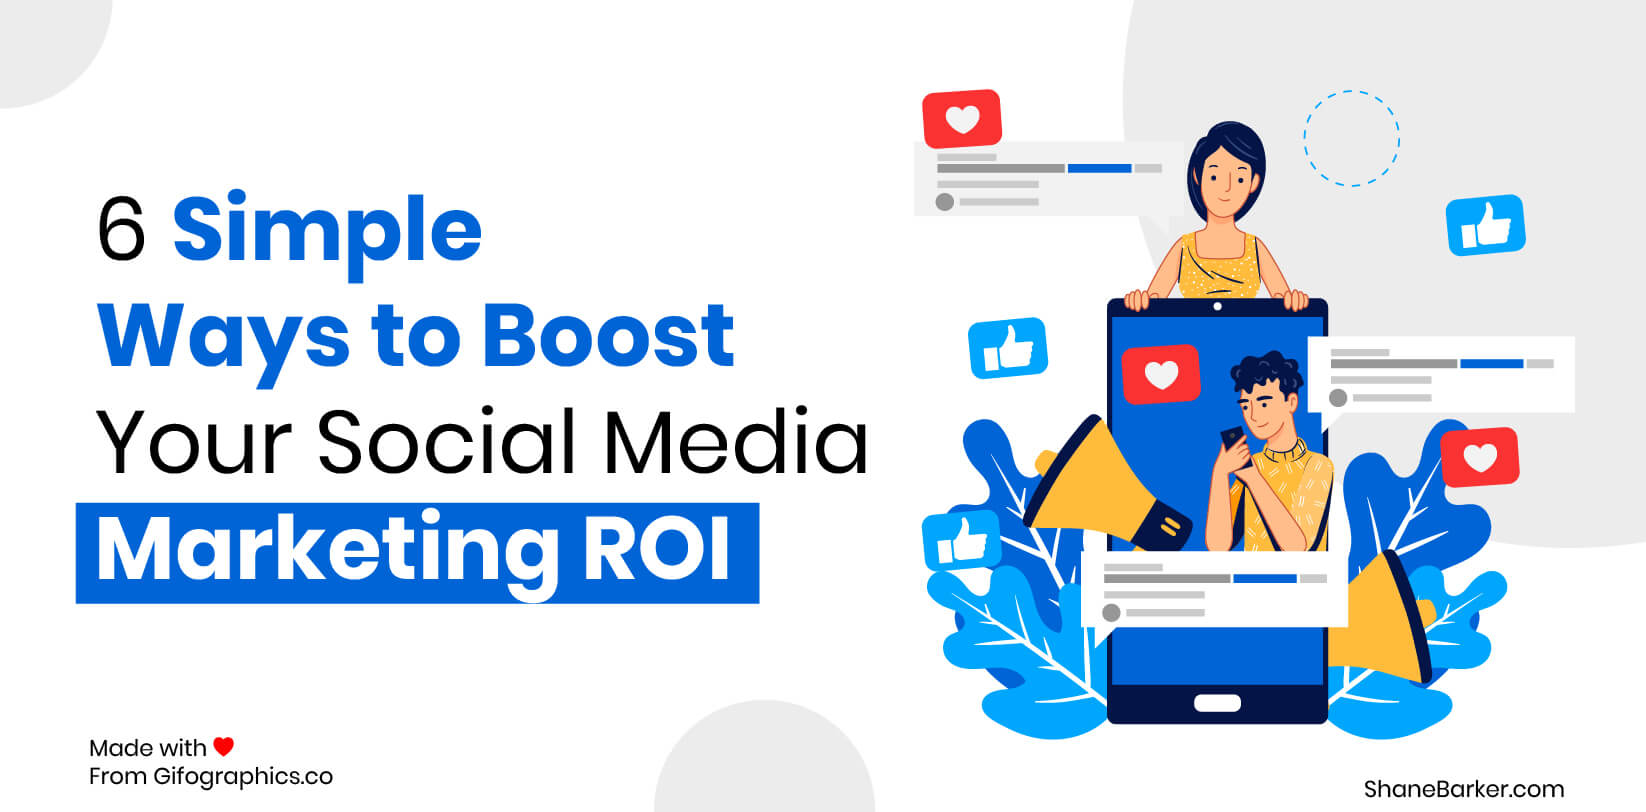 6 Simple Ways to Boost Your Social Media ROI (Infographic)